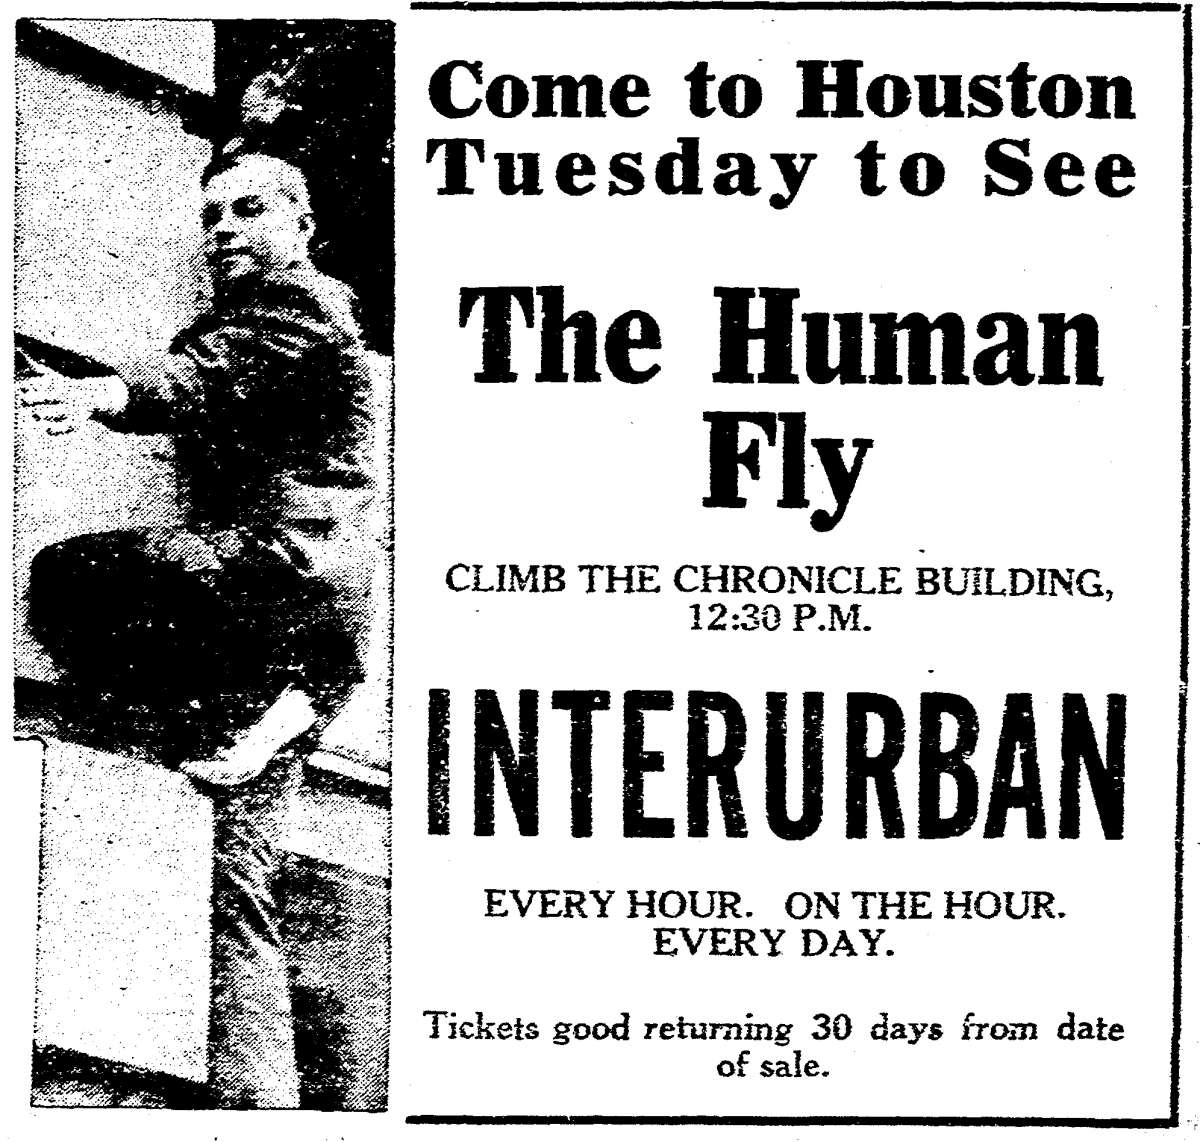 Harry Gardiner: The First Human Fly Who Climbed Skyscrapers from the Ground in the early 20th Century